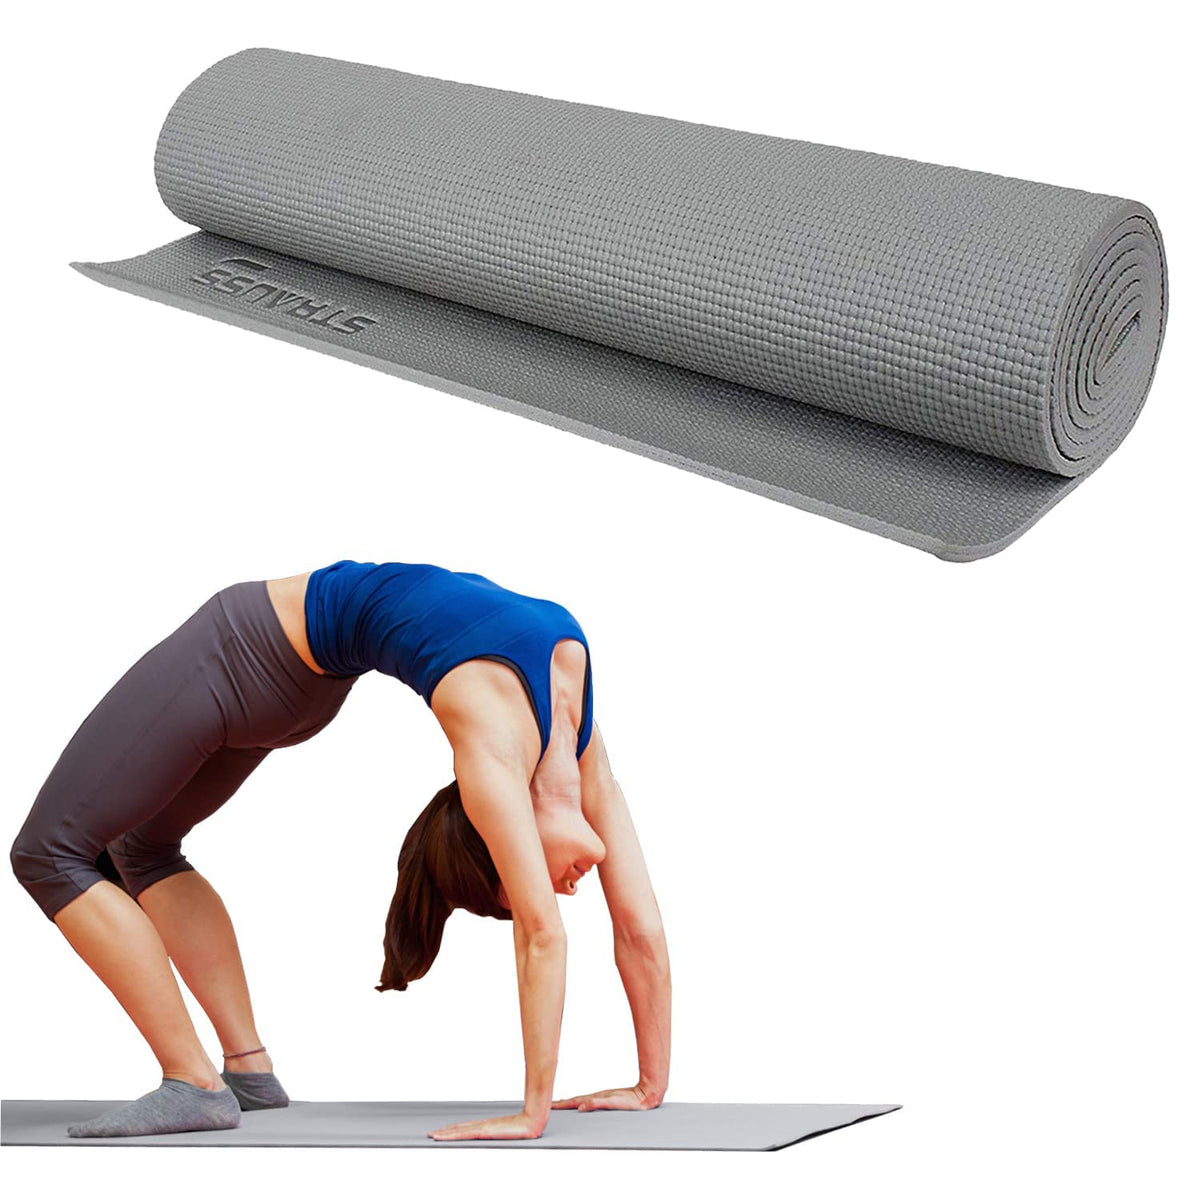 Strauss Multi-Purpose Yoga Mat with Carry Bag|Eco-friendly Anti-Slip Exercise & Fitness Yoga Mat for Men & Women|Home Gym Mat for Workout,Yoga,Pilates & Floor Exercises|Sizes: 4mm/6mm/8mm,(Grey)